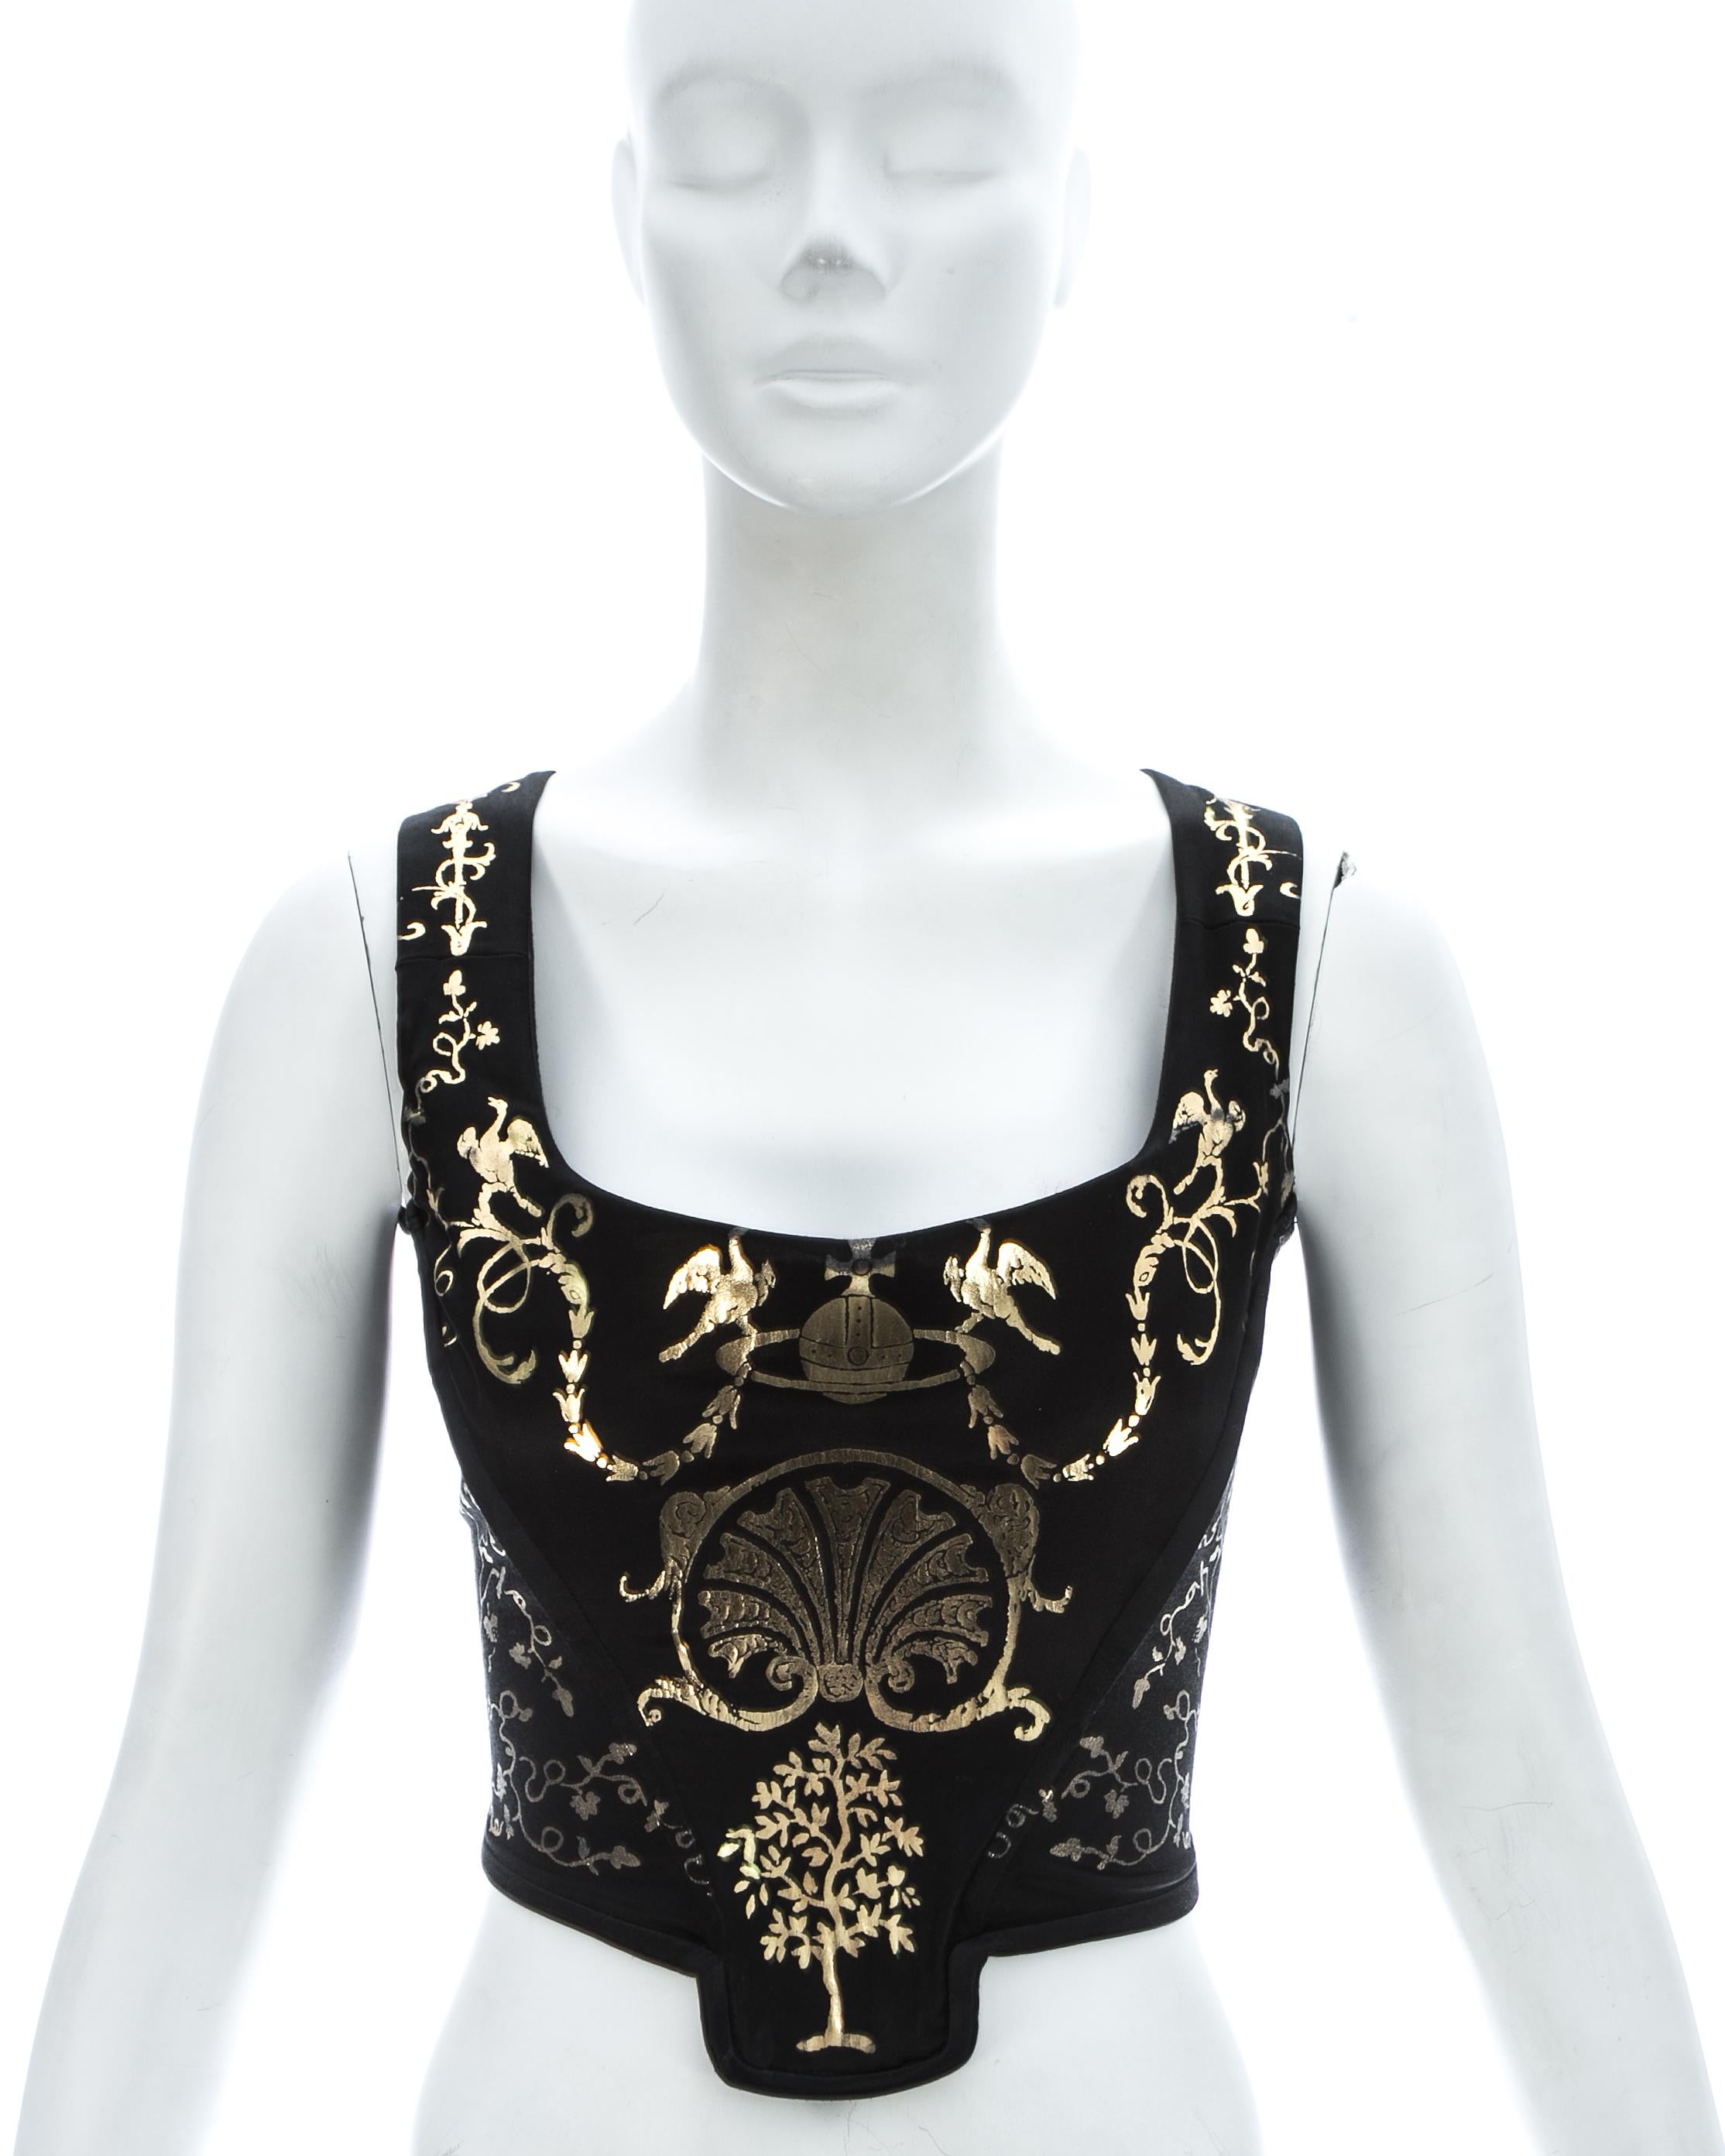 Vivienne Westwood black satin corset with metallic gold applied decoration of classical figures and motifs, and internal boning; designed to chinch the waist and push the breasts up.

'Portrait Collection' Fall-Winter 1990